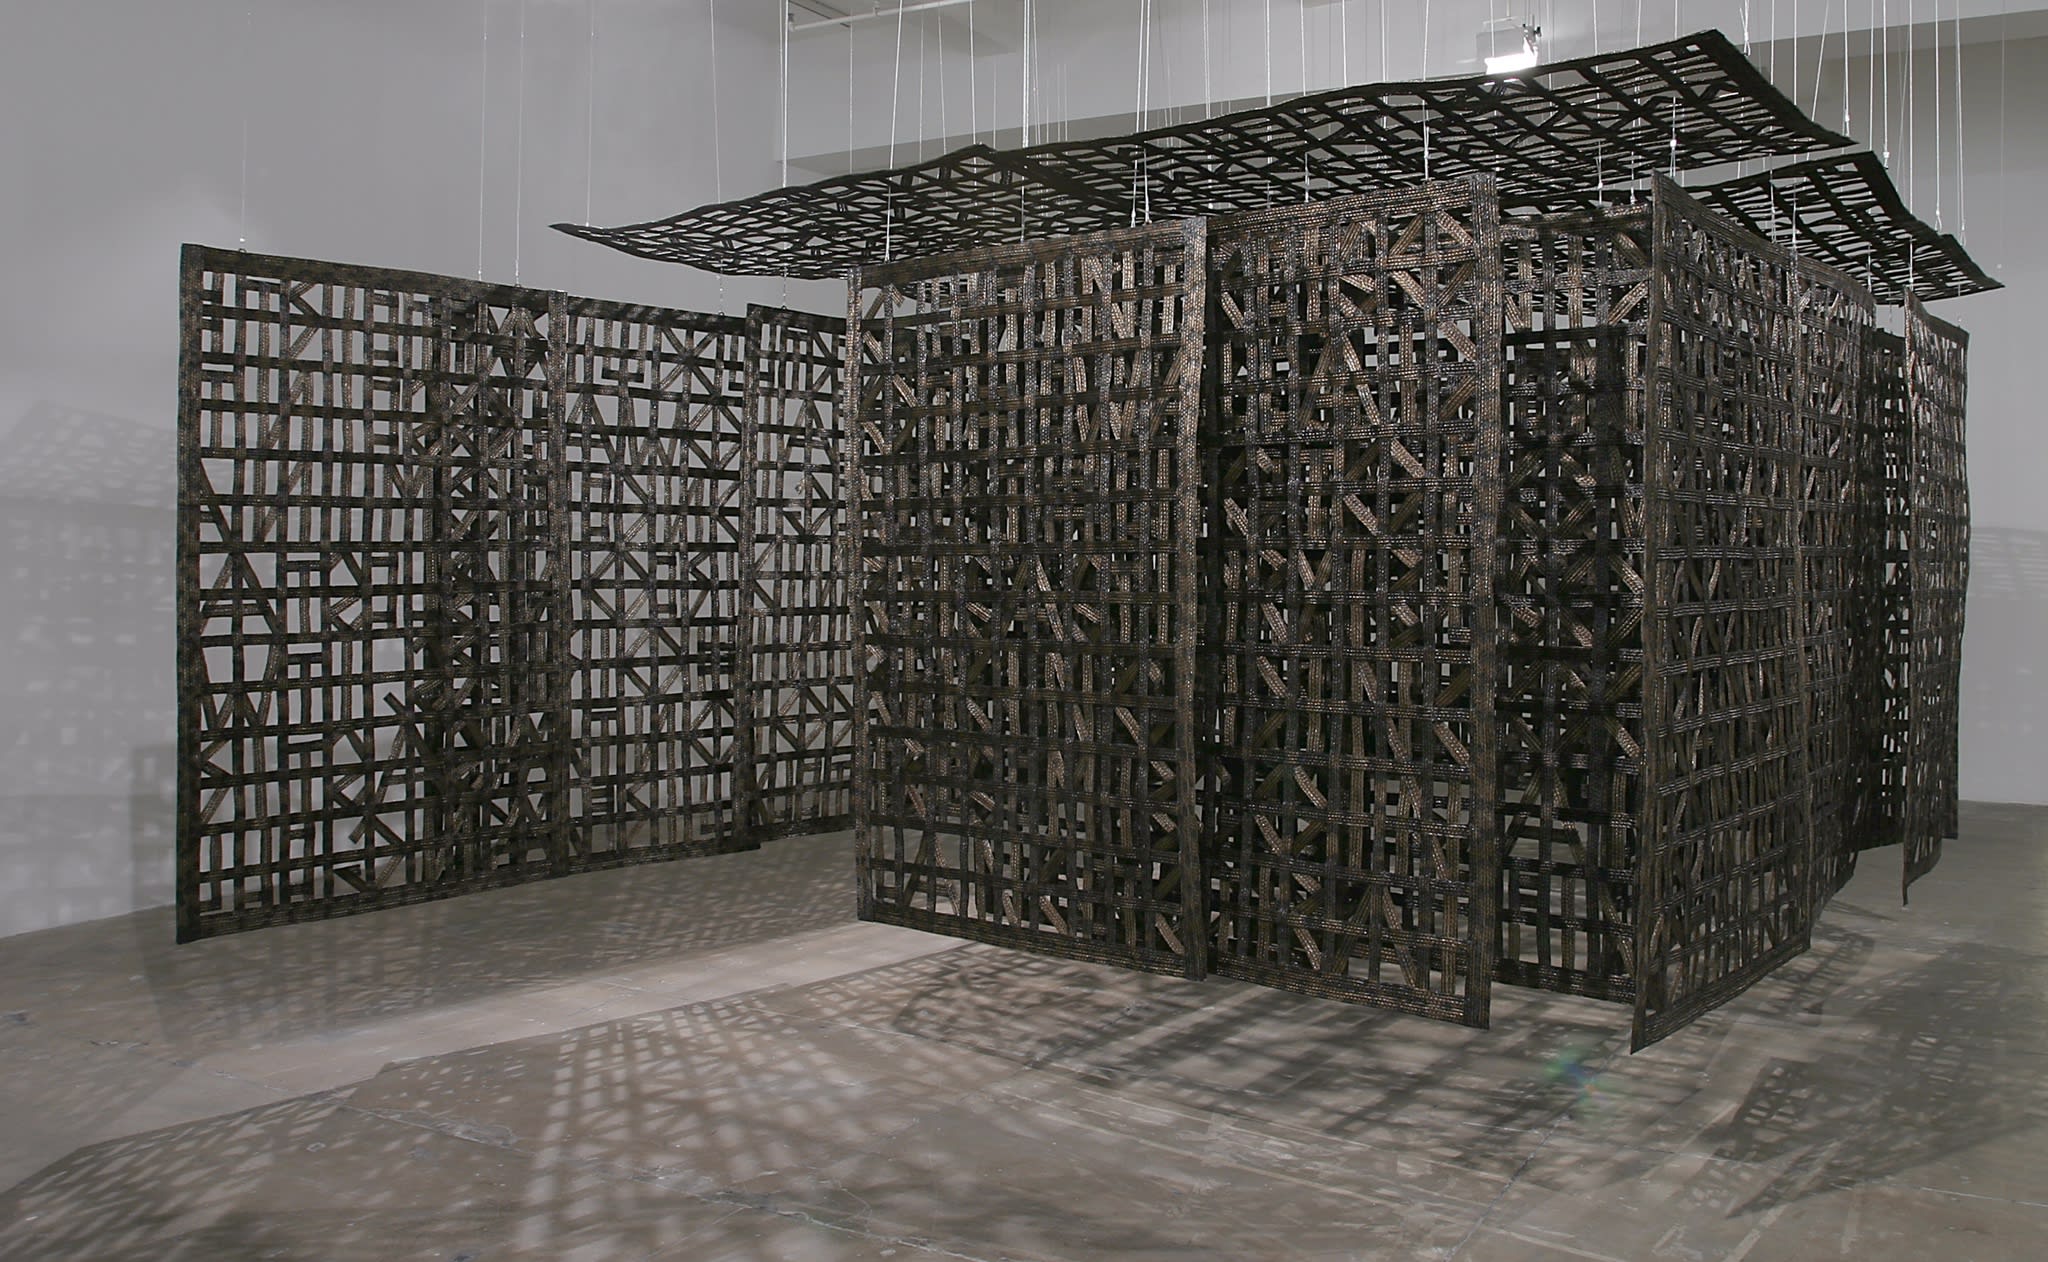 A large wooden sculpture, made up of several panels made up of wooden carved patterns which hang from the ceiling, forming a partially enclosed space.